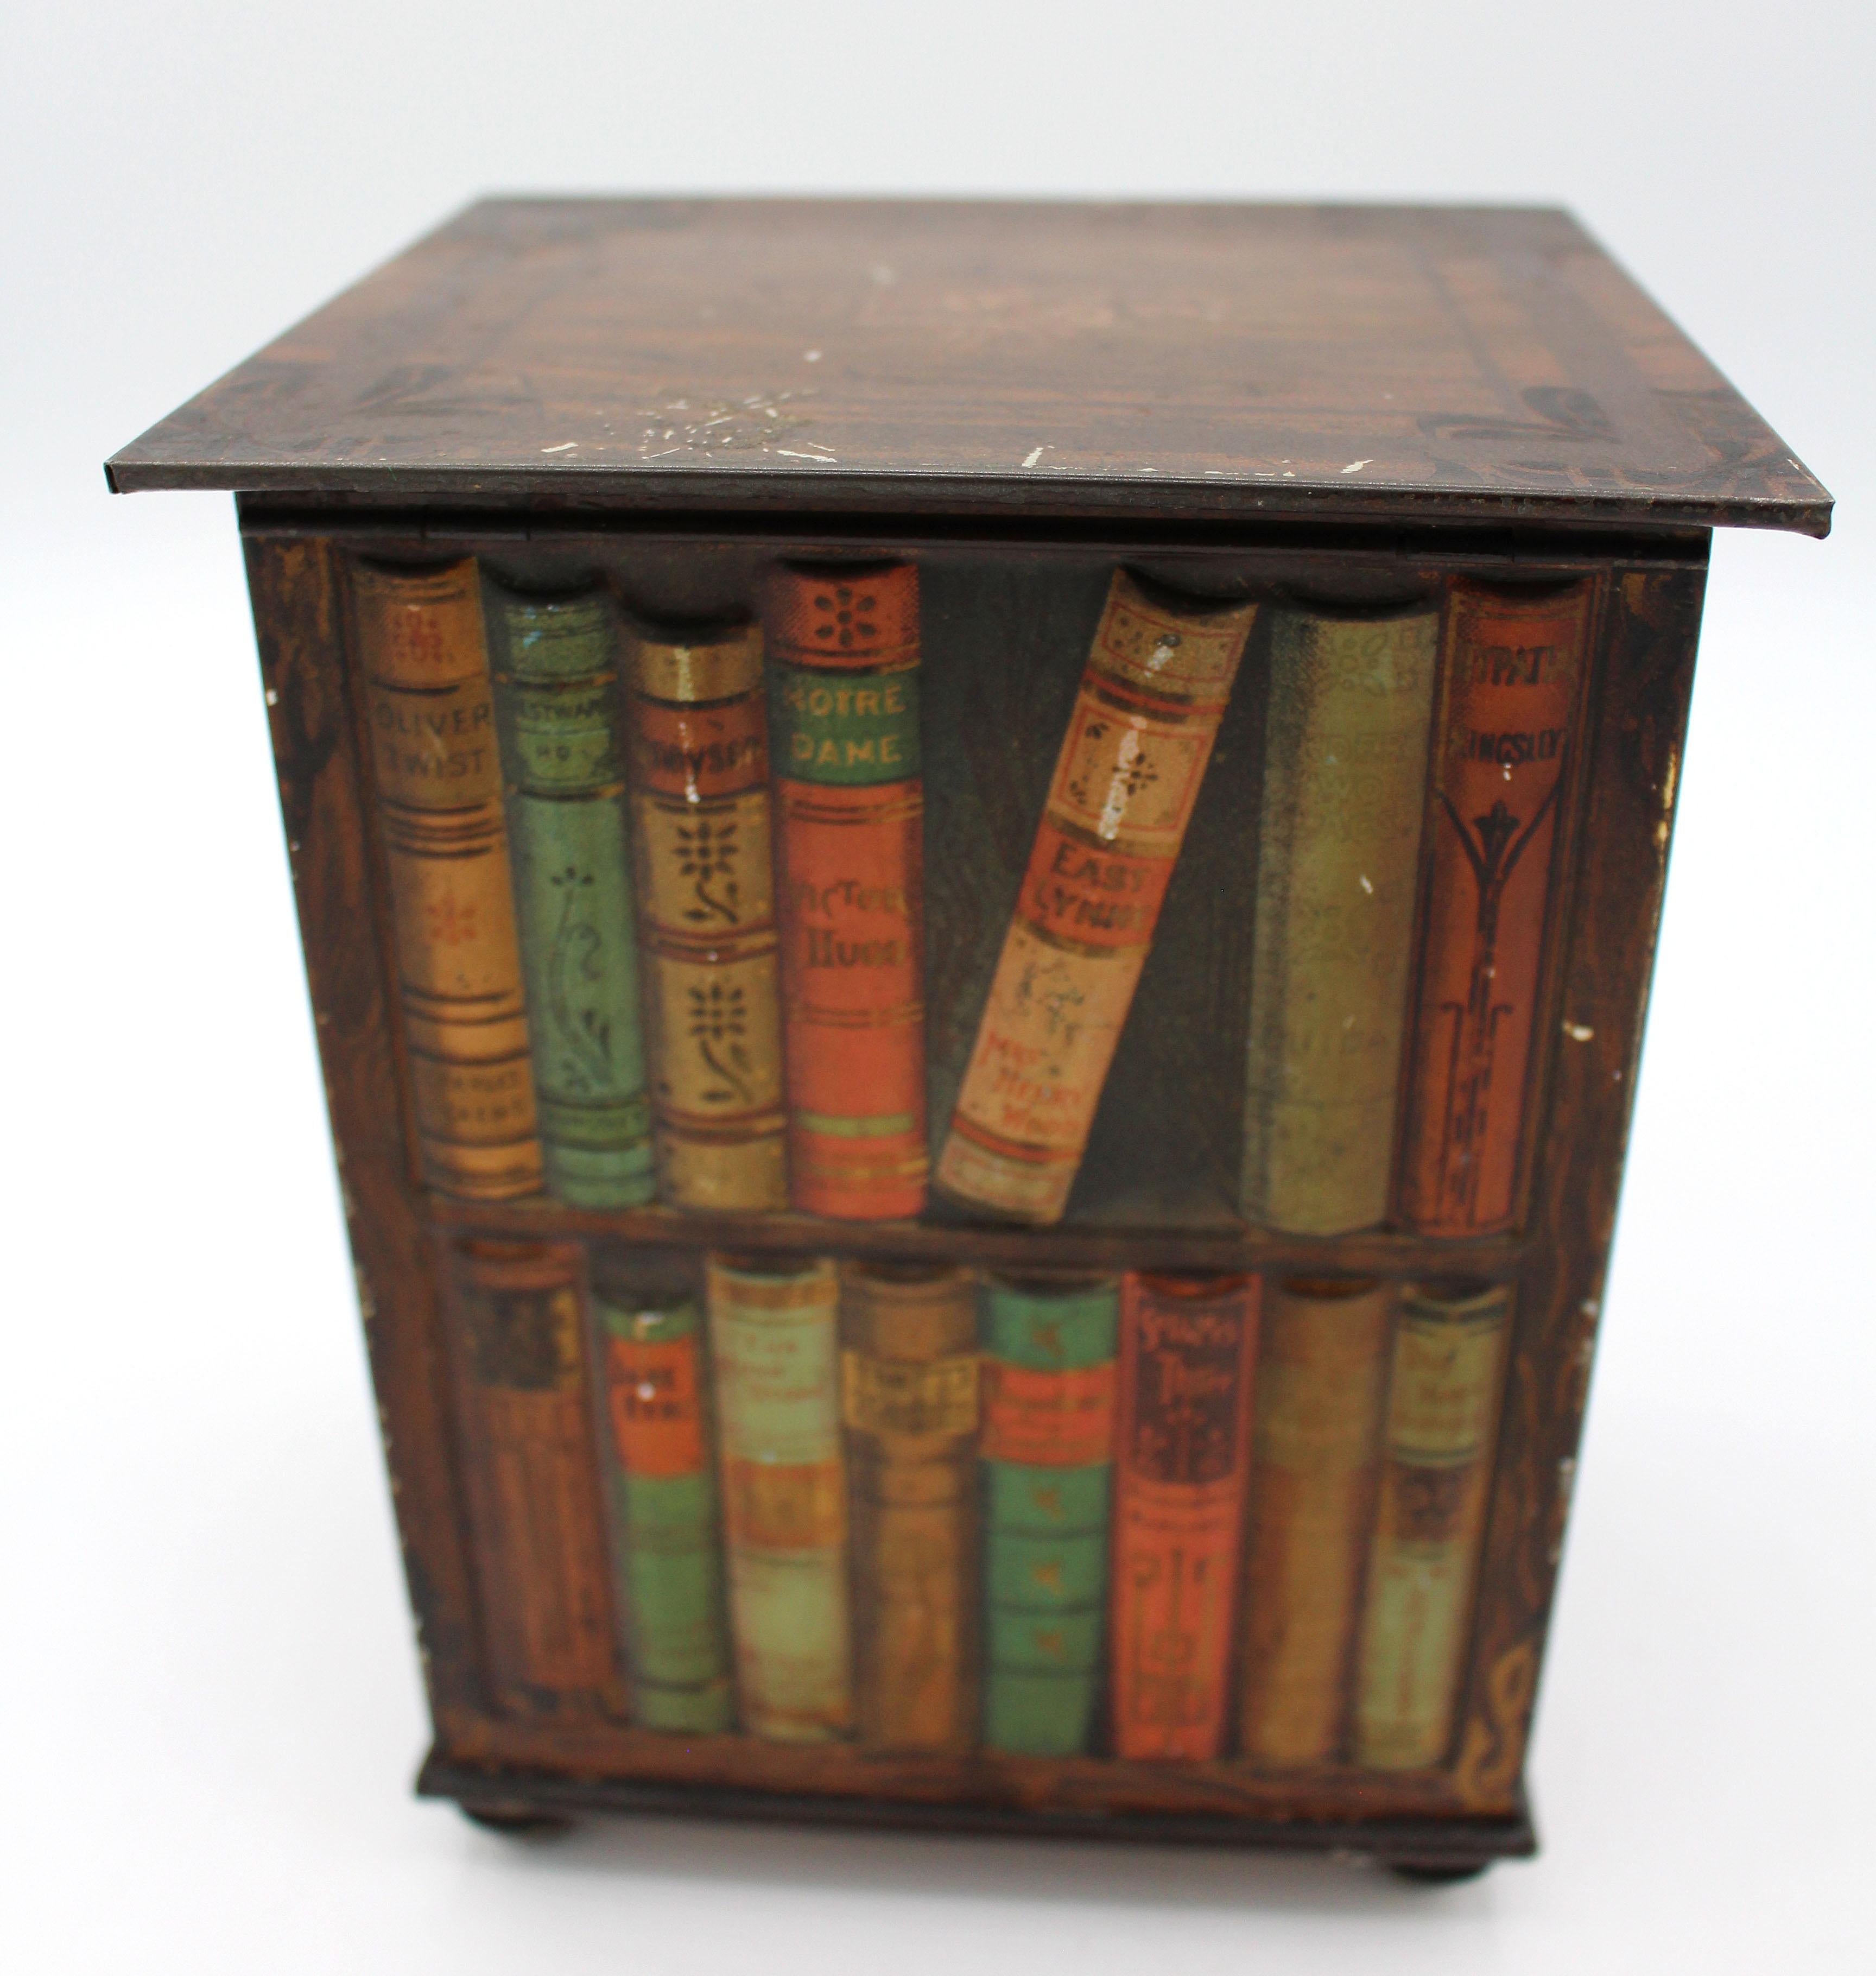 Faux Revolving Bookcase Biscuit Tin Box by Huntley & Palmers, 1905, English In Good Condition For Sale In Chapel Hill, NC